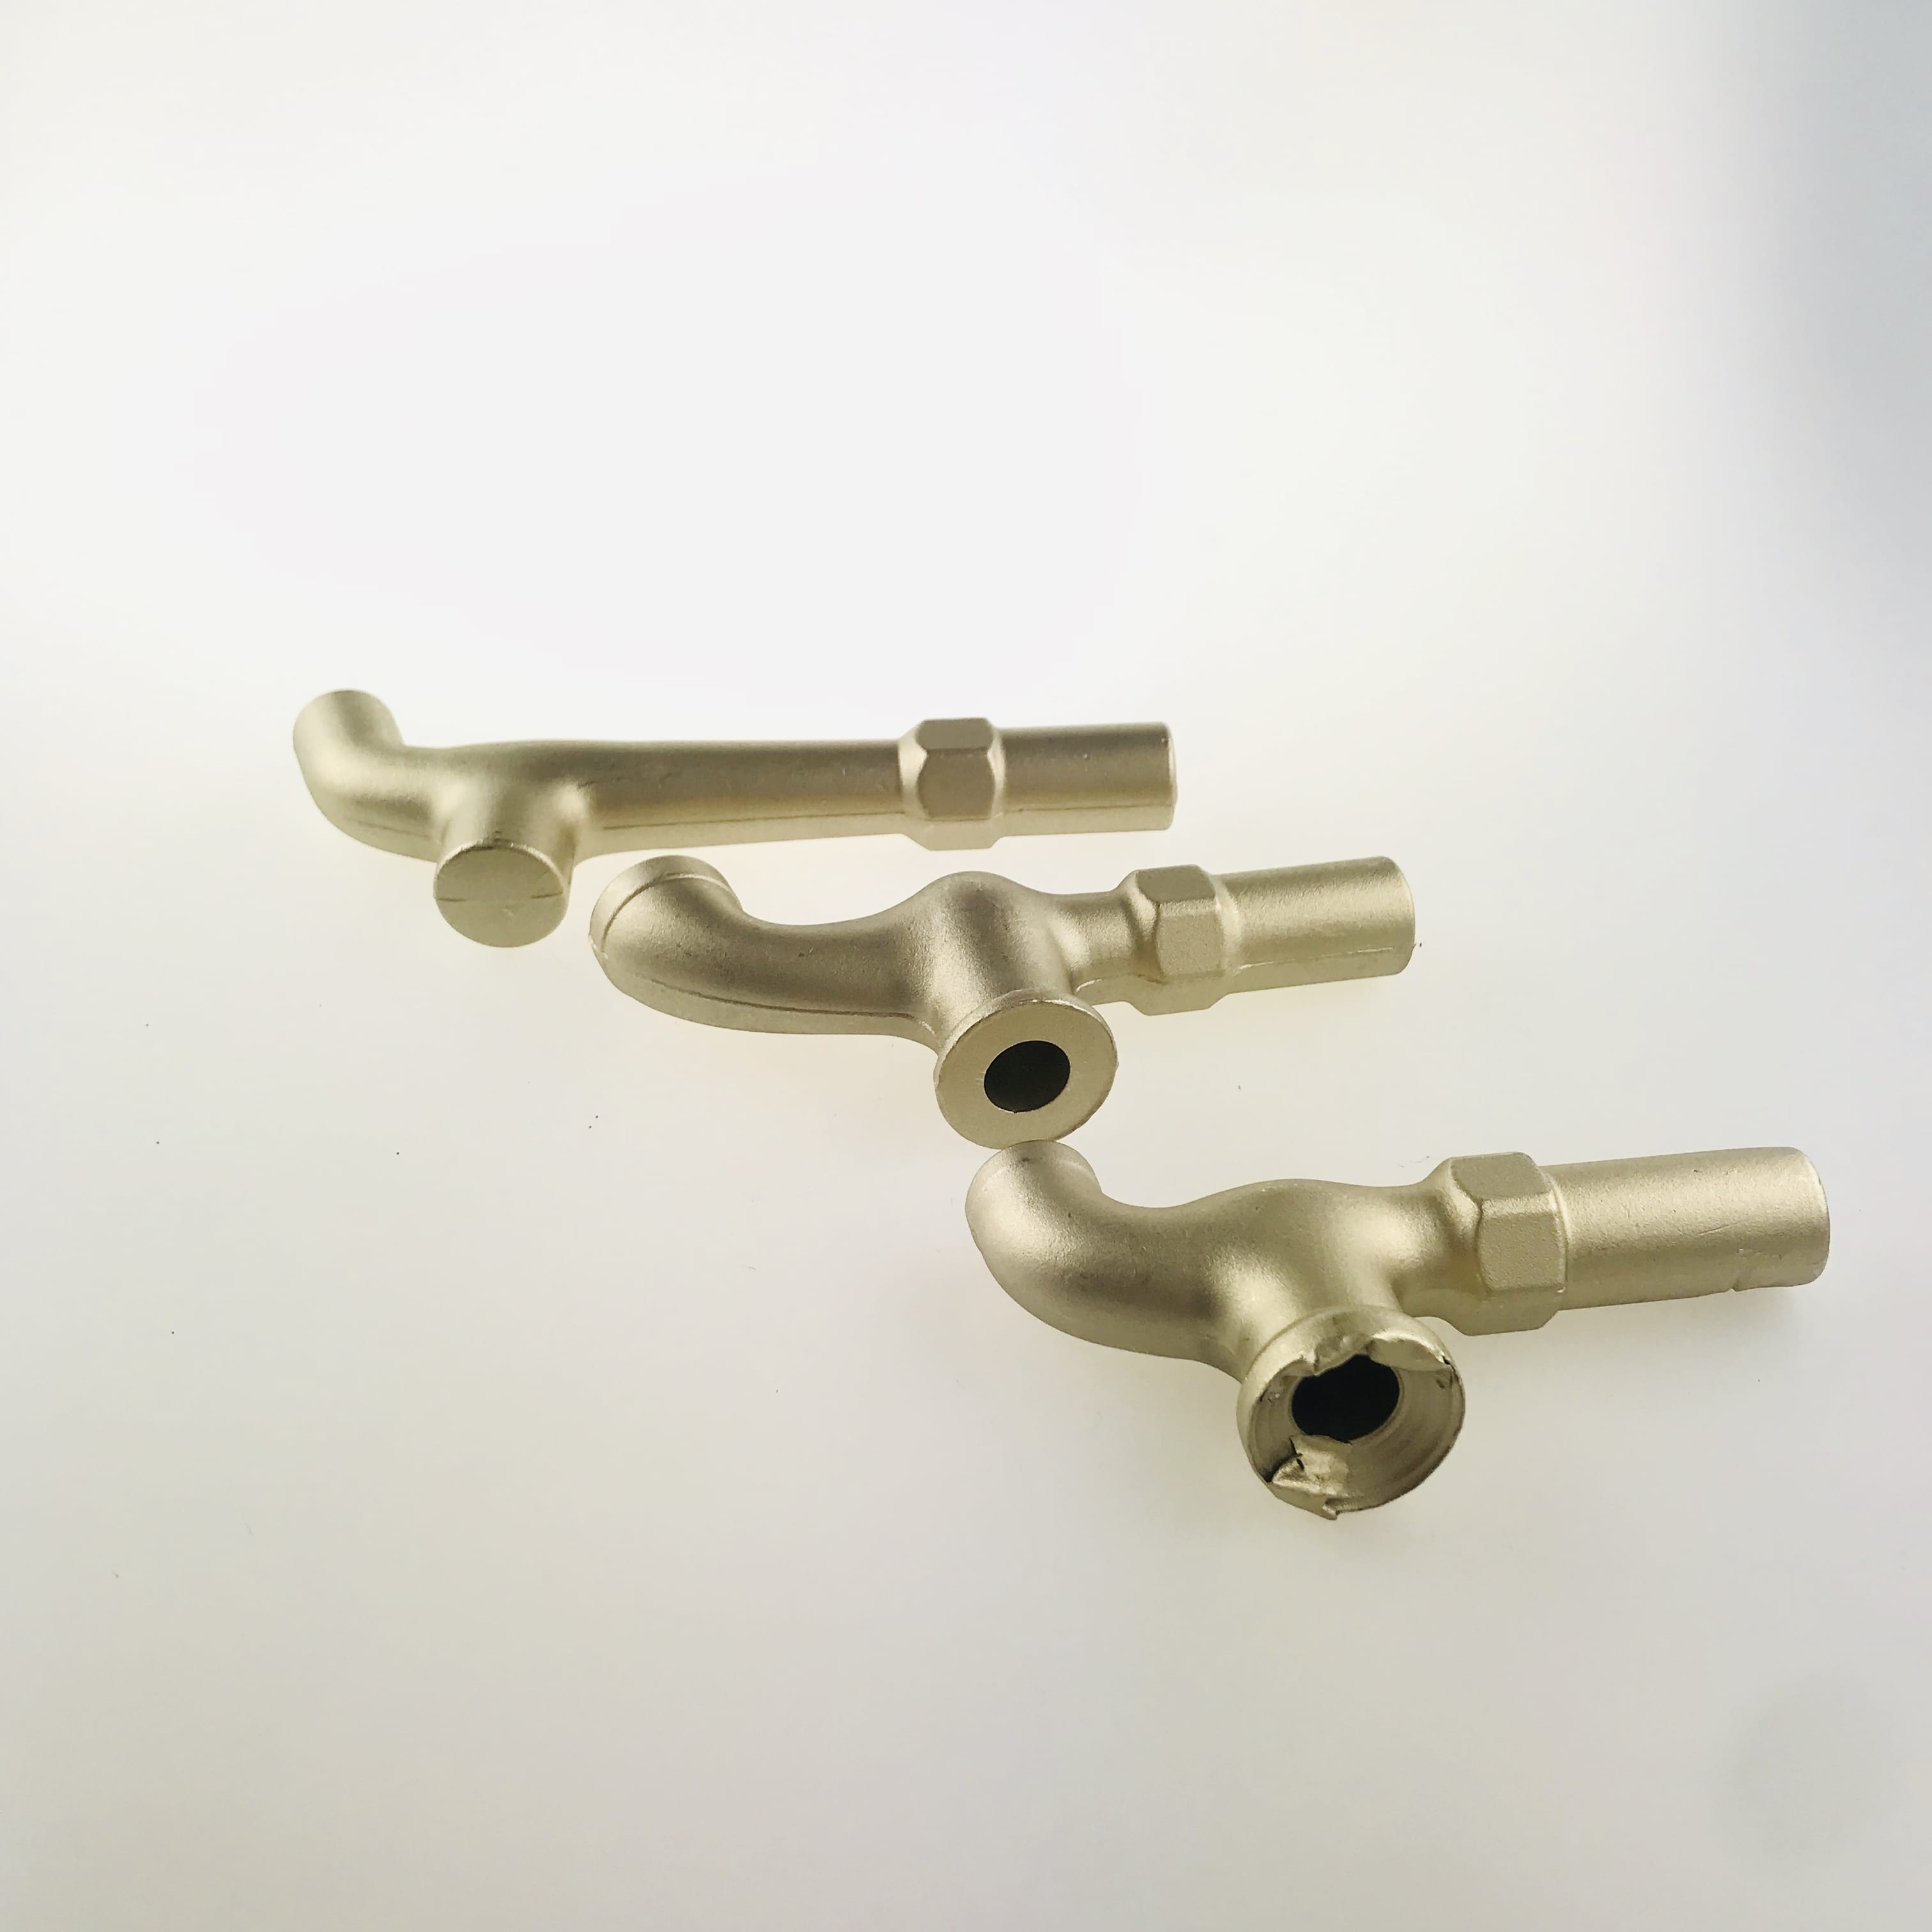 OEM brass plumbing fittings Forged High Pressure Pipe Fittings brass compression fittings Support product customization (7)